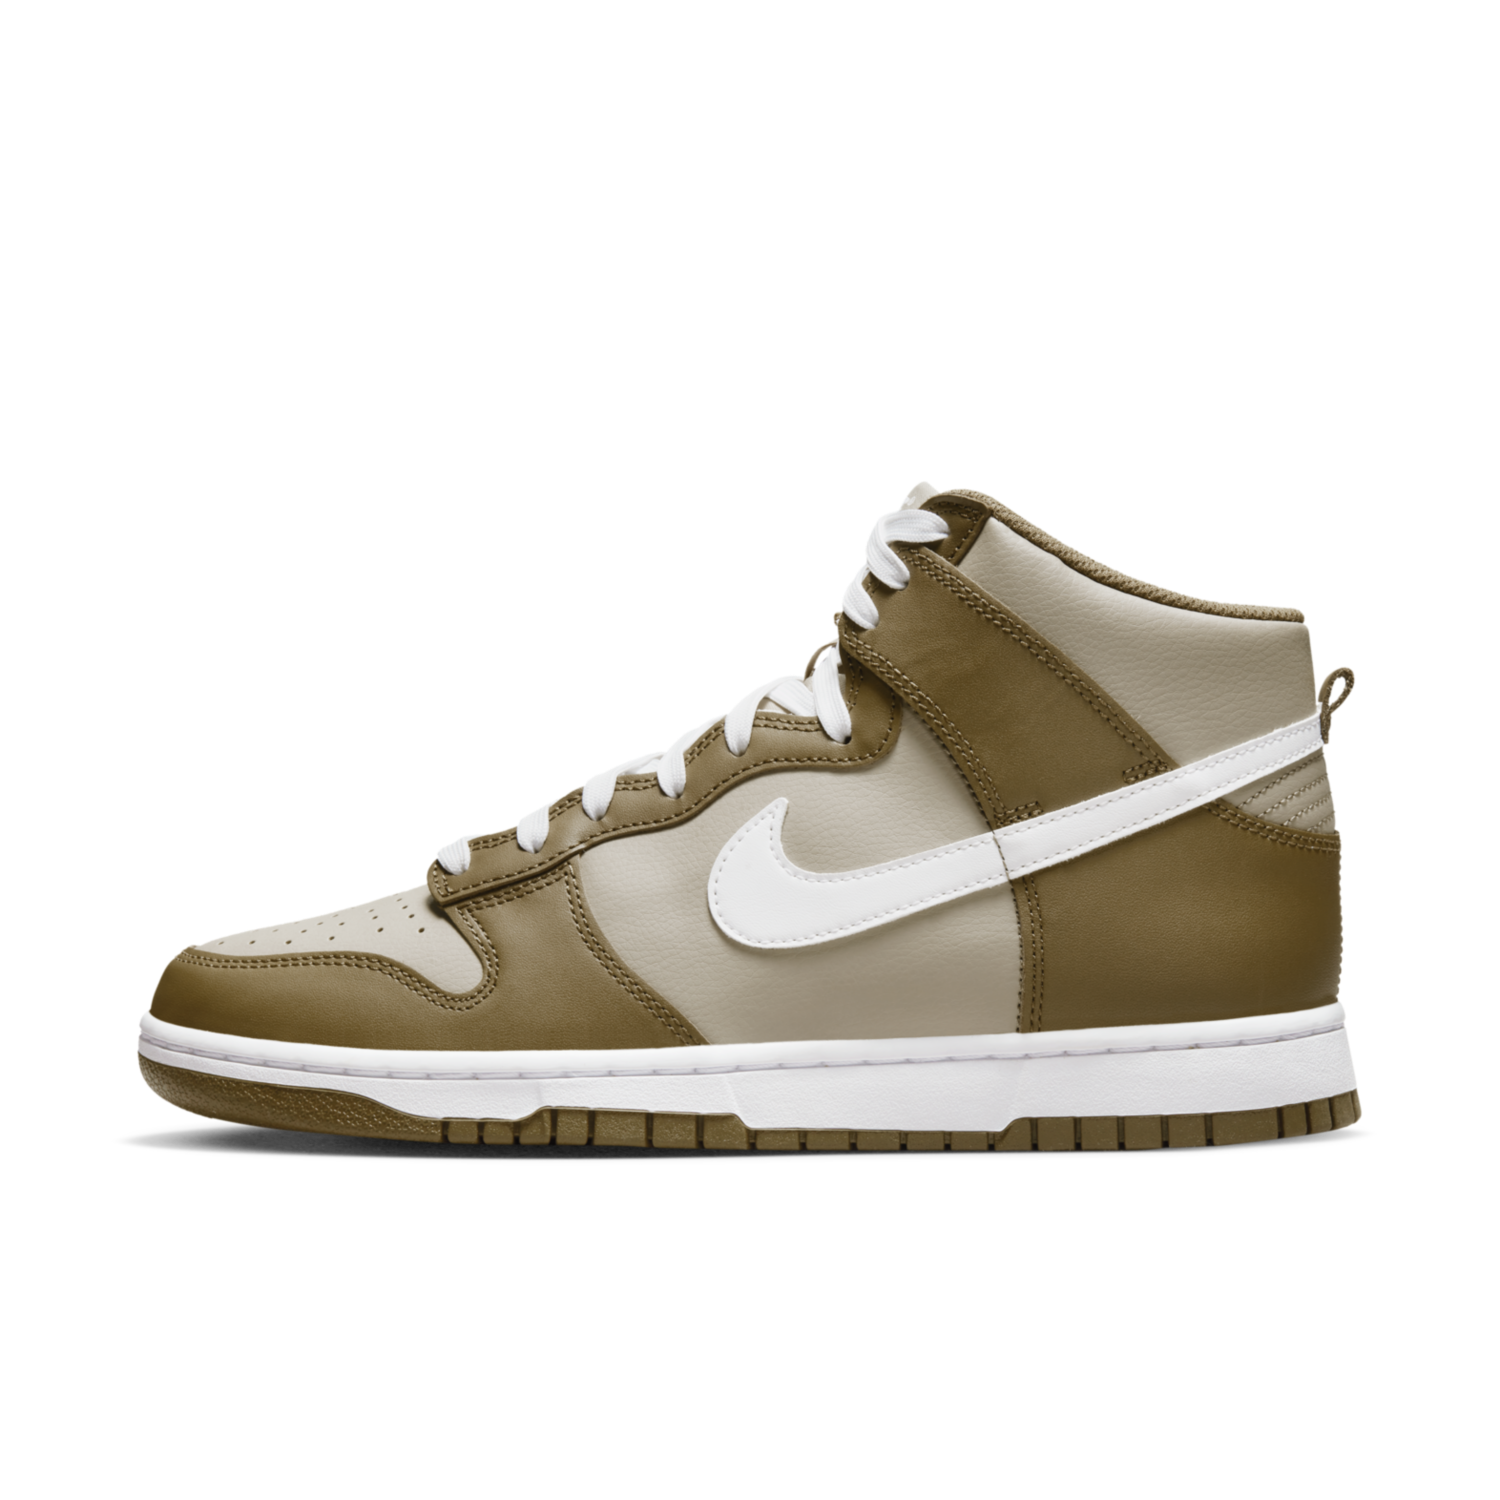 Nike Dunk High Retro 'Mocha' Most Wanted Sneaker Releases Woche 34